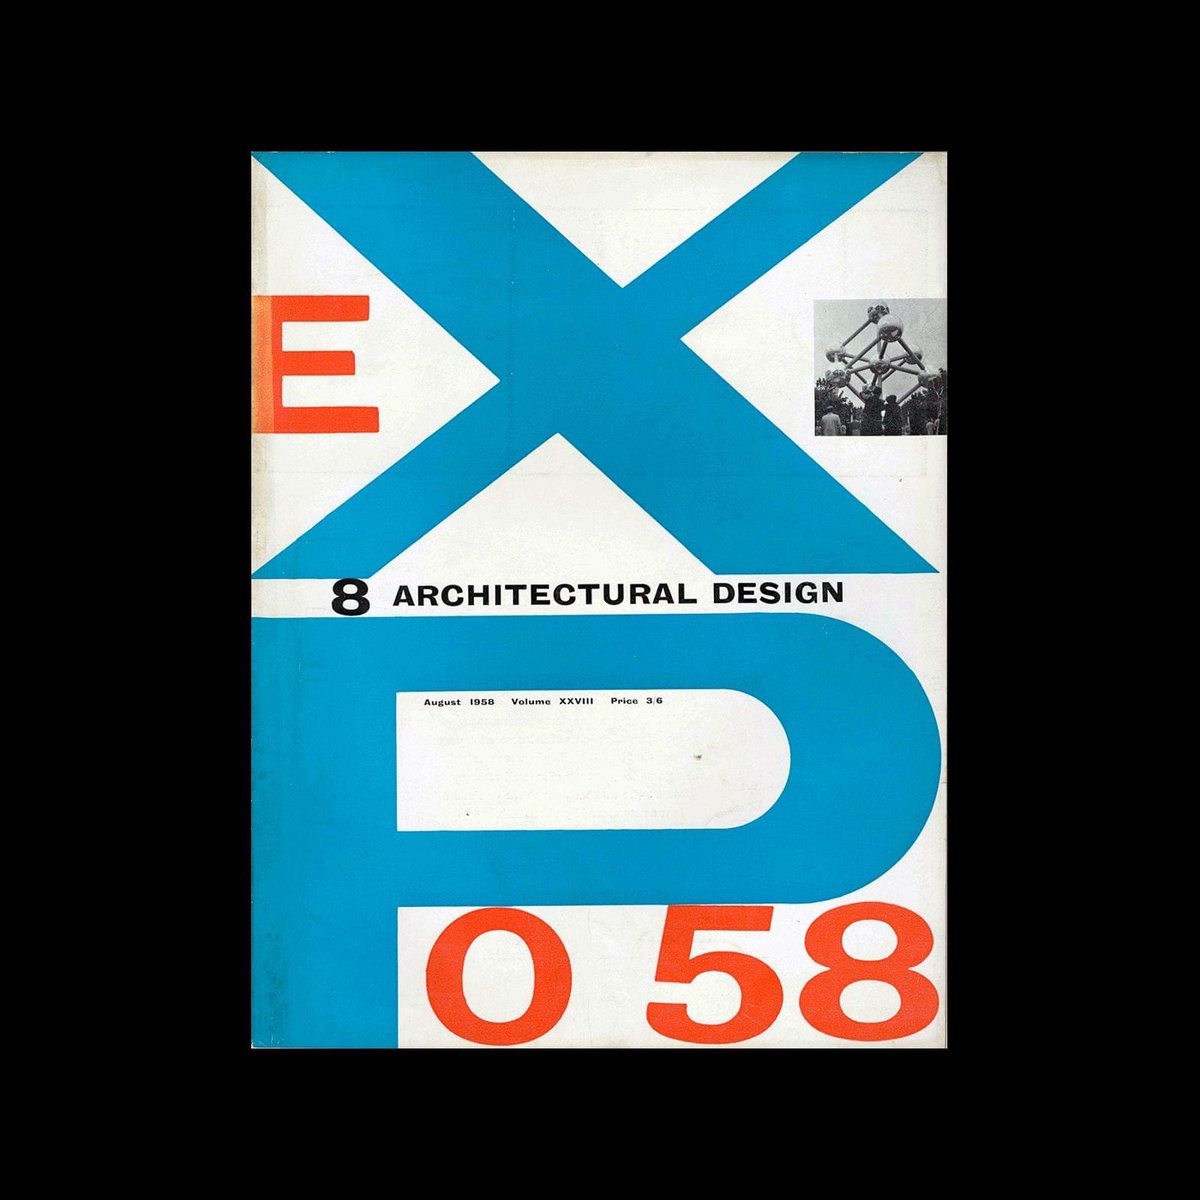 Architectural Design, August 1958
Cover: Experimenta Typographica by Theo Crosby
designreviewed.com/artefacts/arch…
#theocrosby #architecturaldesign #expo58 #typography